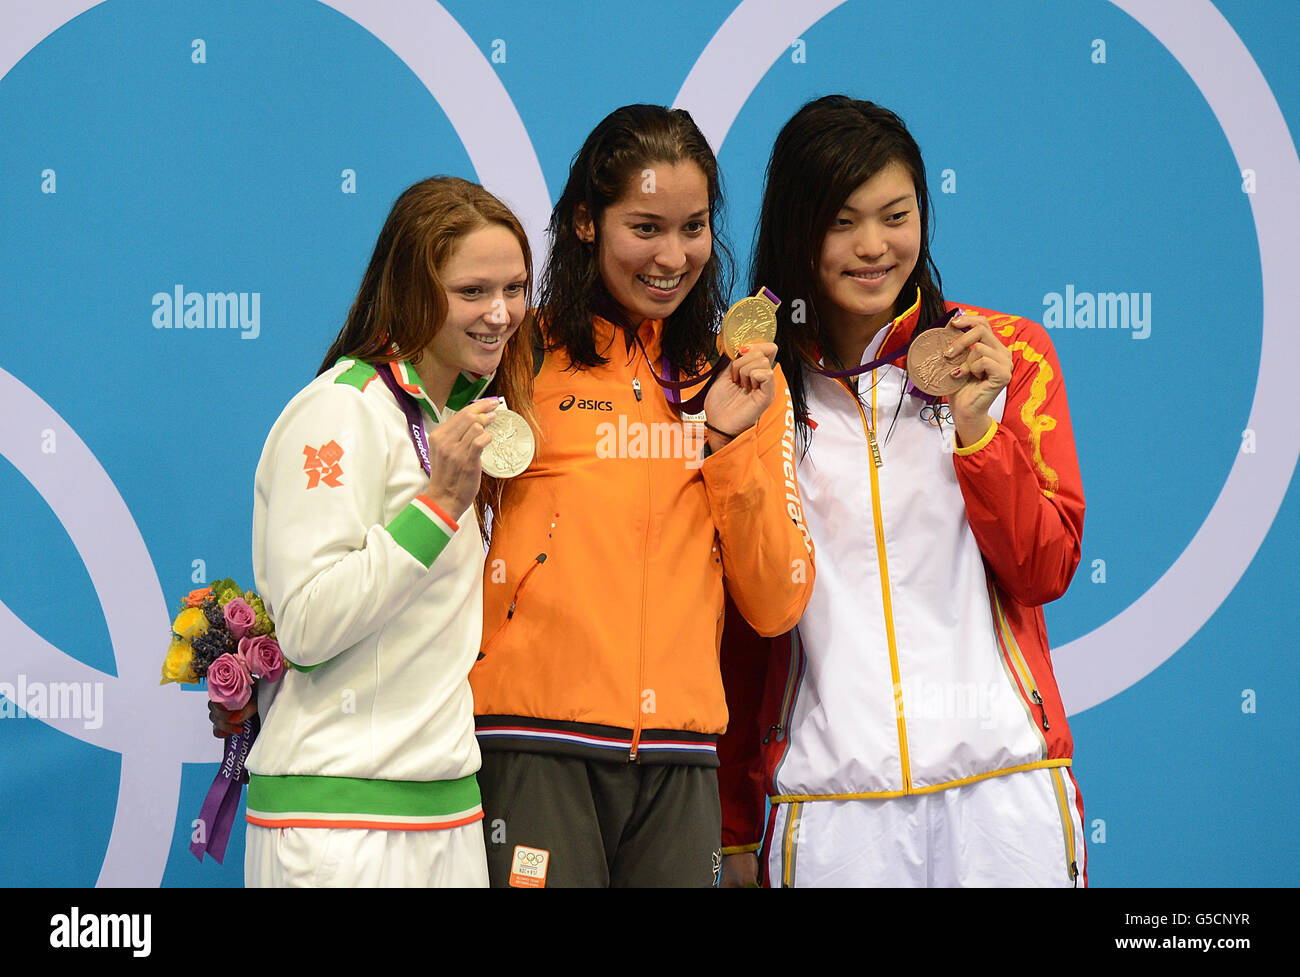 (left to right) Silver Medalist Belarus' Aliaksandra Herasimenia, Gold Medalist Netherlands' Ranomi Kromowidjojo and Bronze Medalist Yi Tang celebrate with their medals after the Women's 100m Freestyle Final at the Aquatics Centre in the Olympic Park, London. Stock Photo